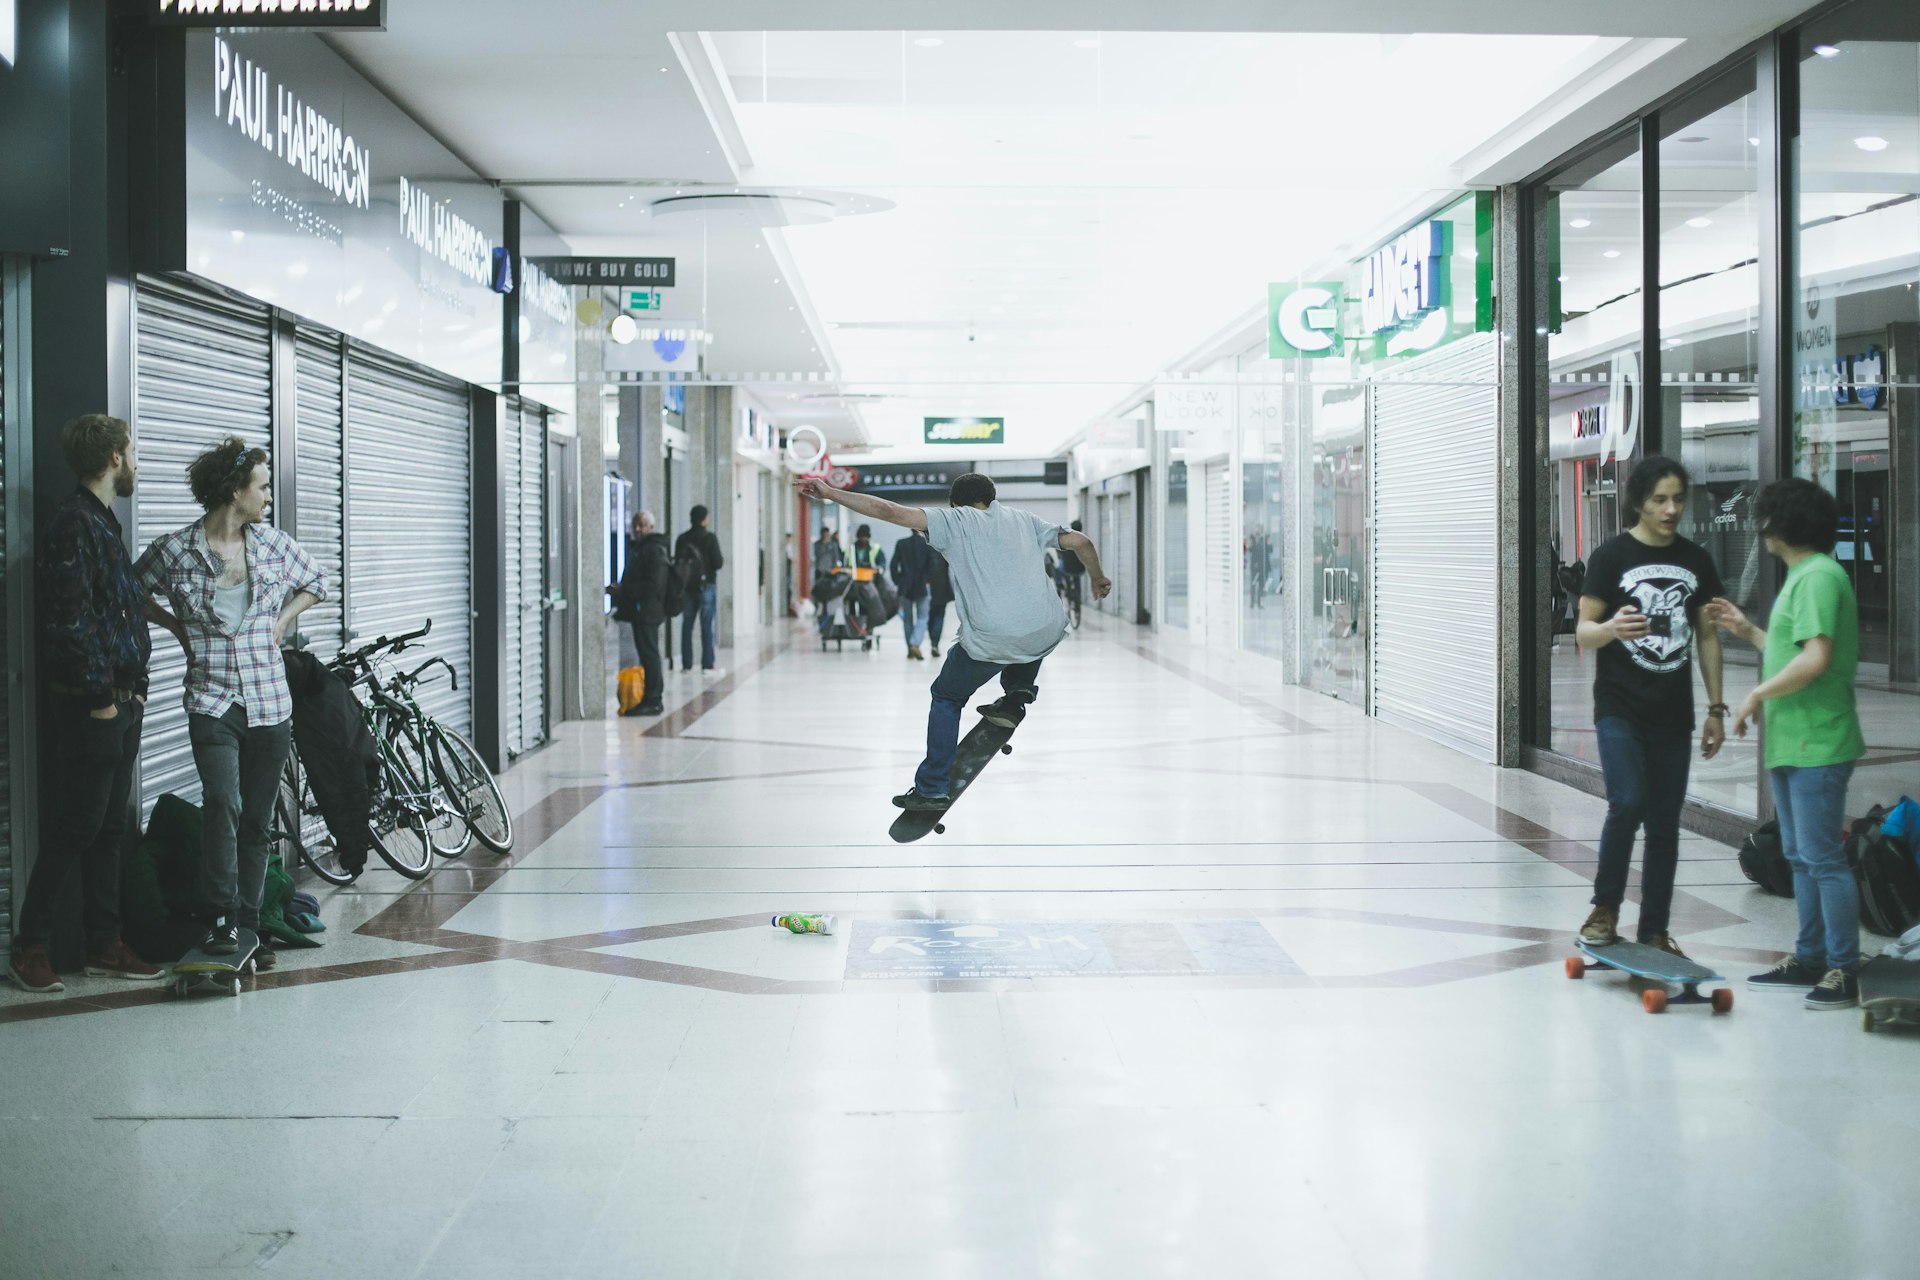 How a drab shopping centre became a haven for London's skaters